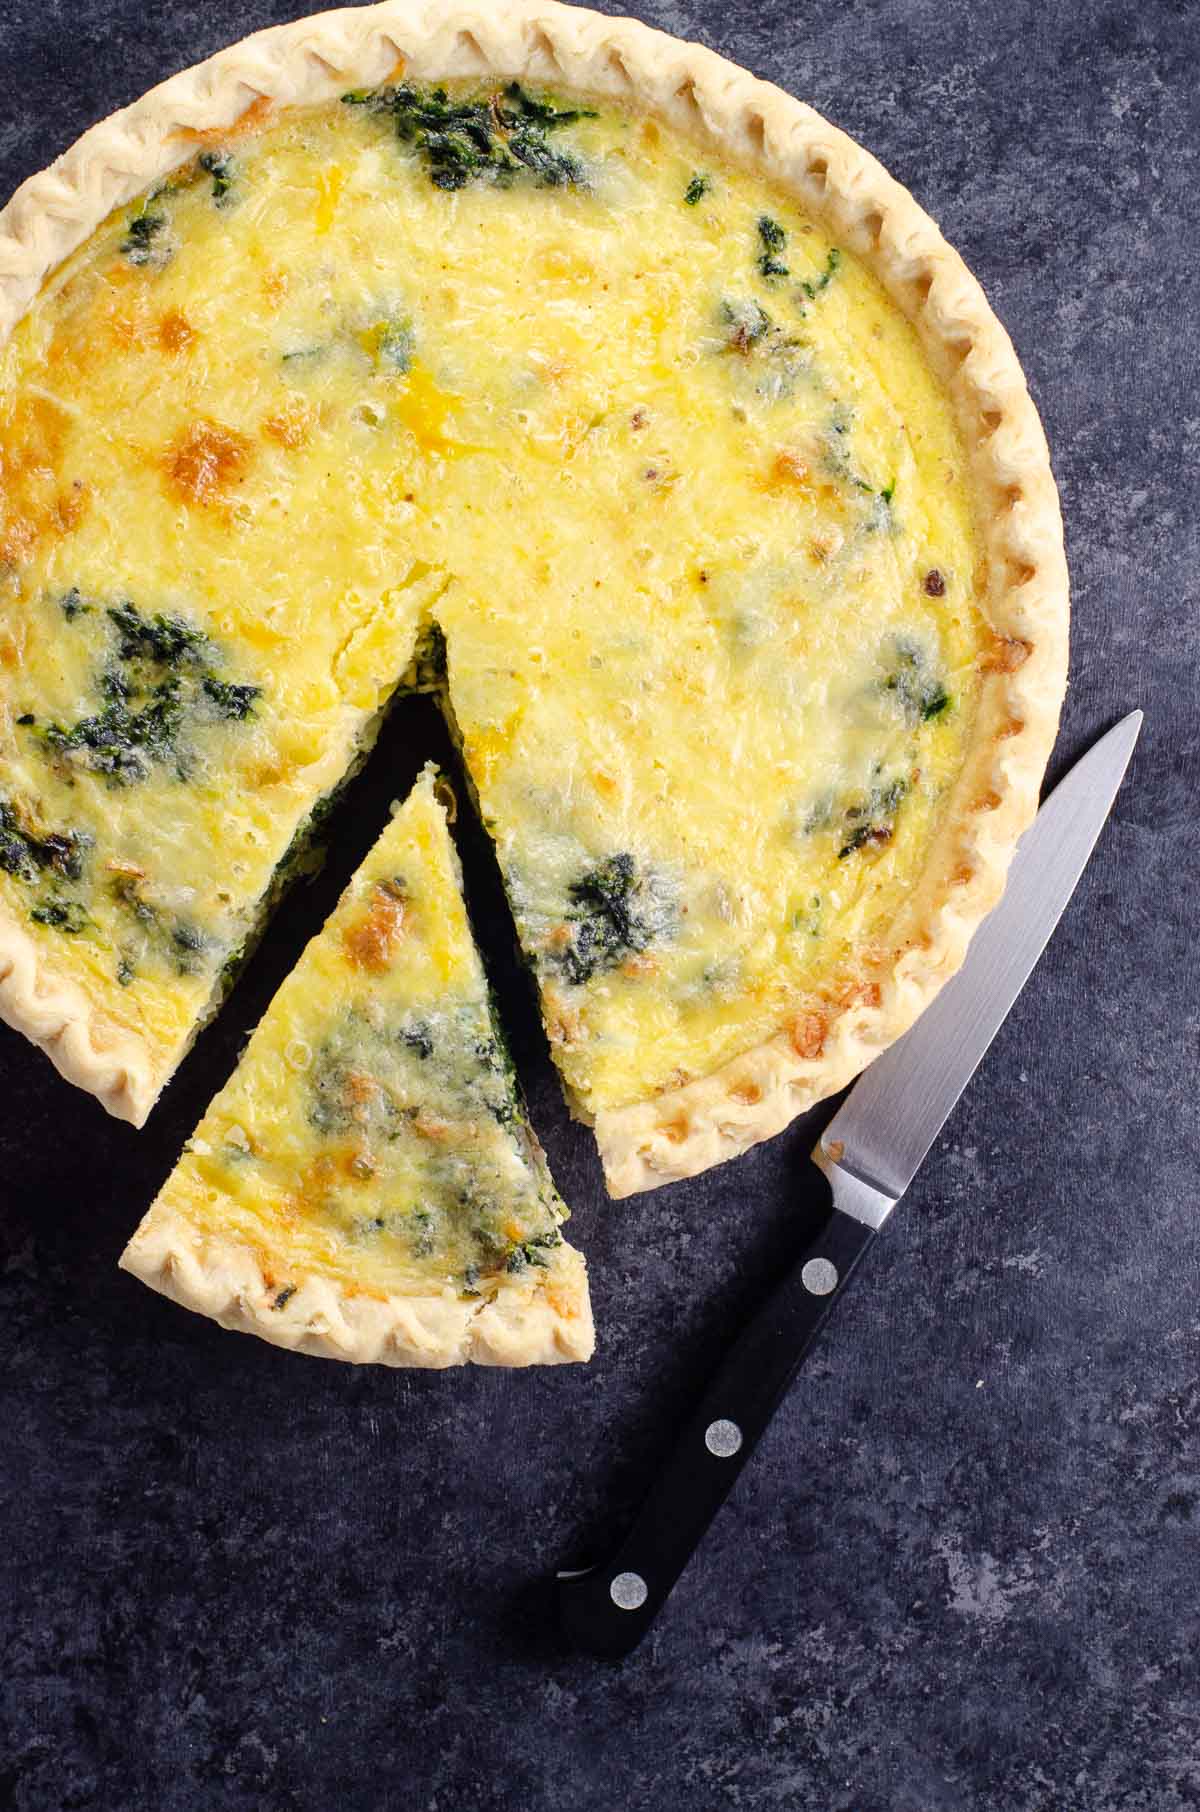 quiche florentine (spinach quiche) with a  slice cut out and a small knife